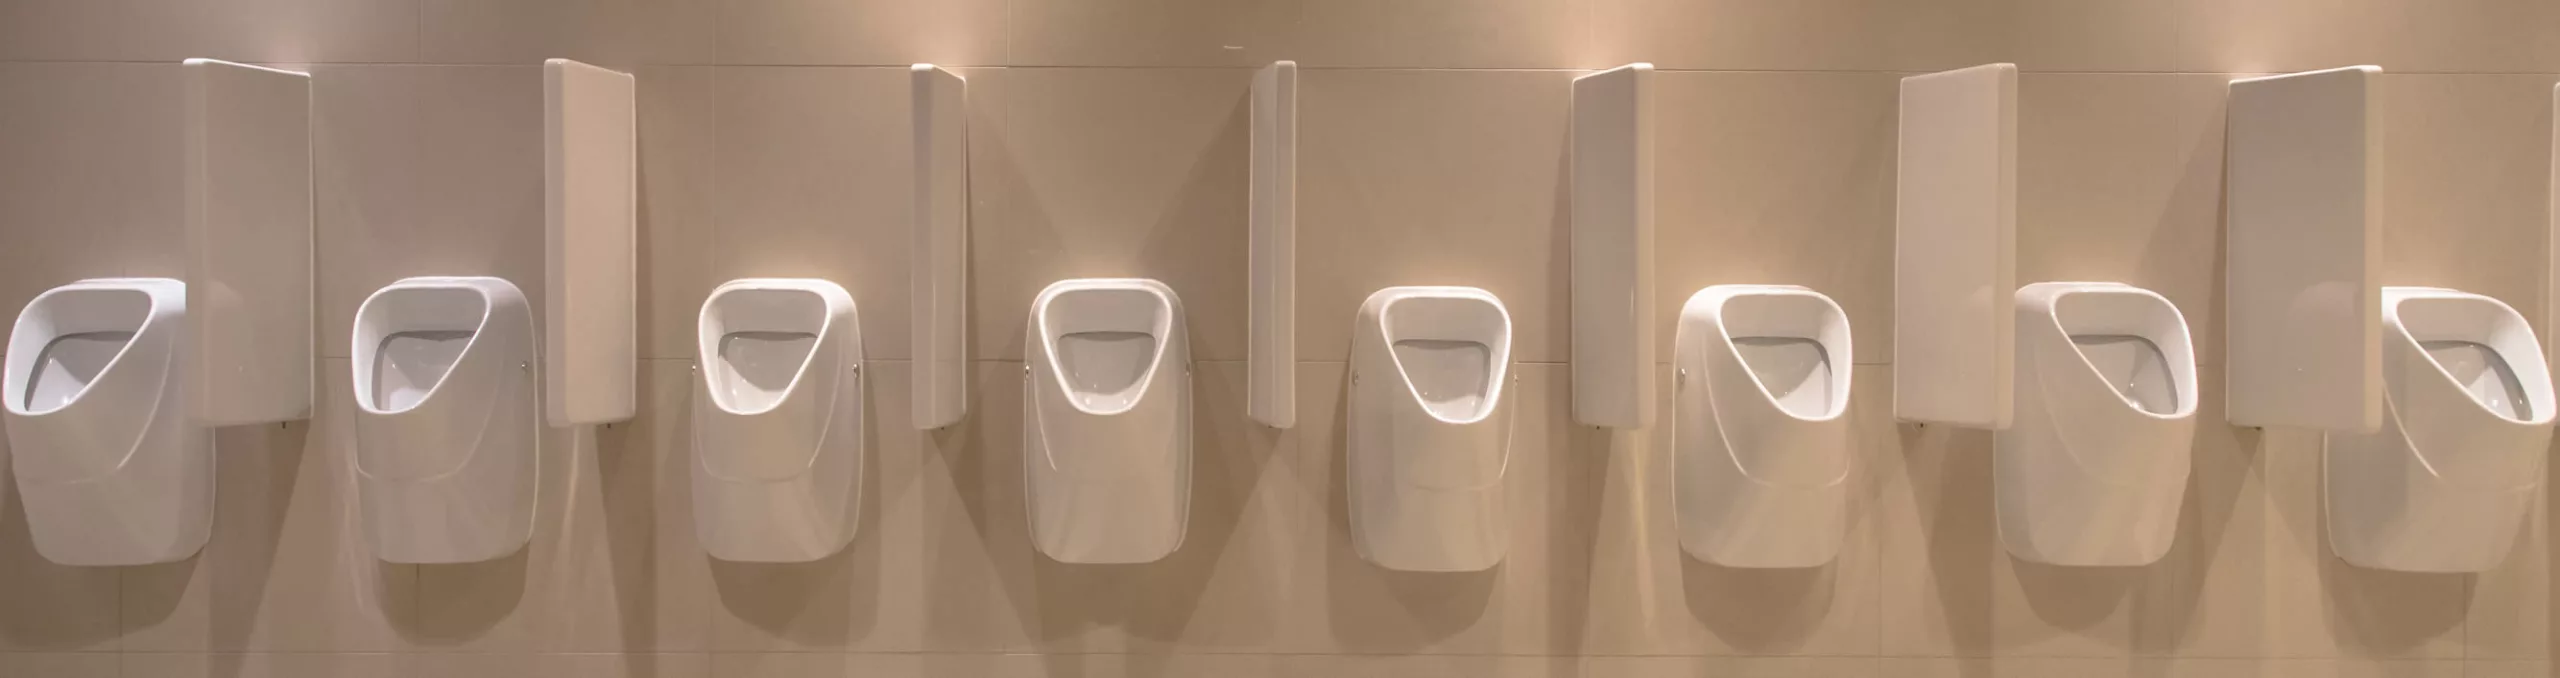 Row of urinals on white tiles